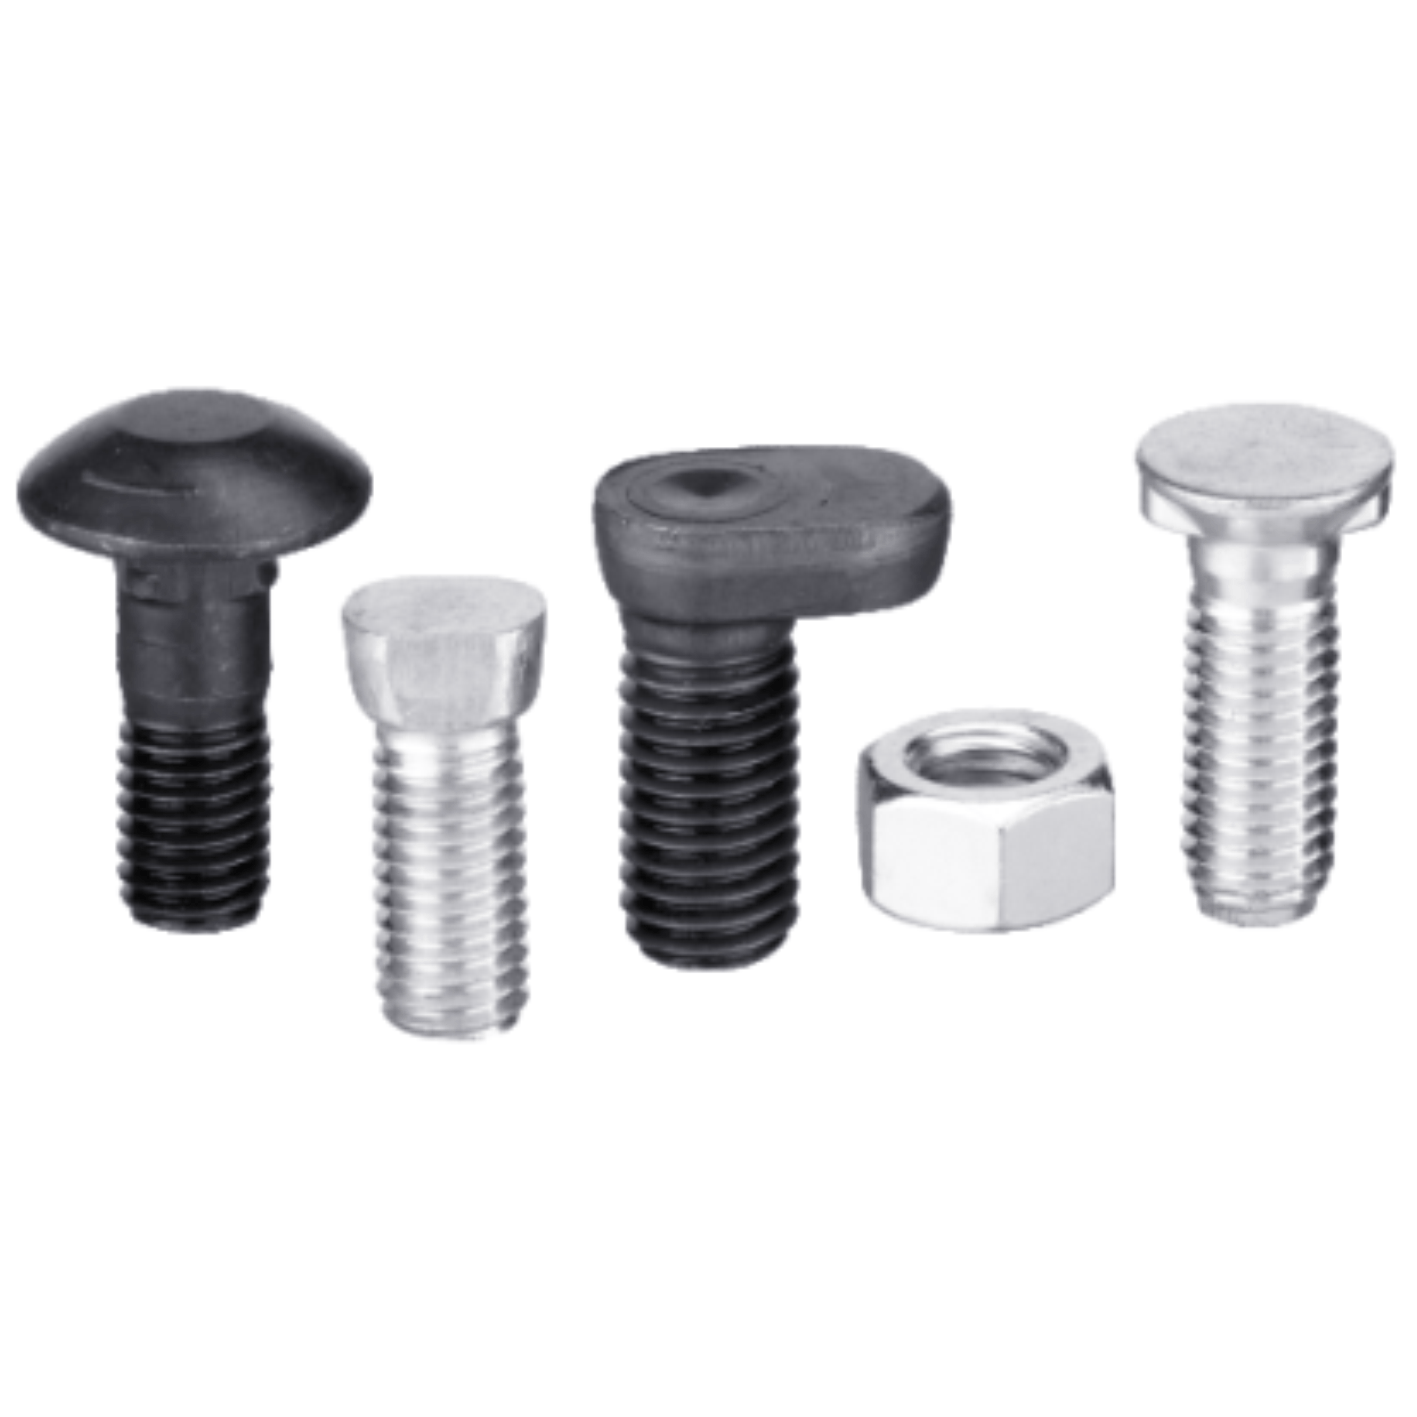 Plough bolts and special bolts for agricultural machines